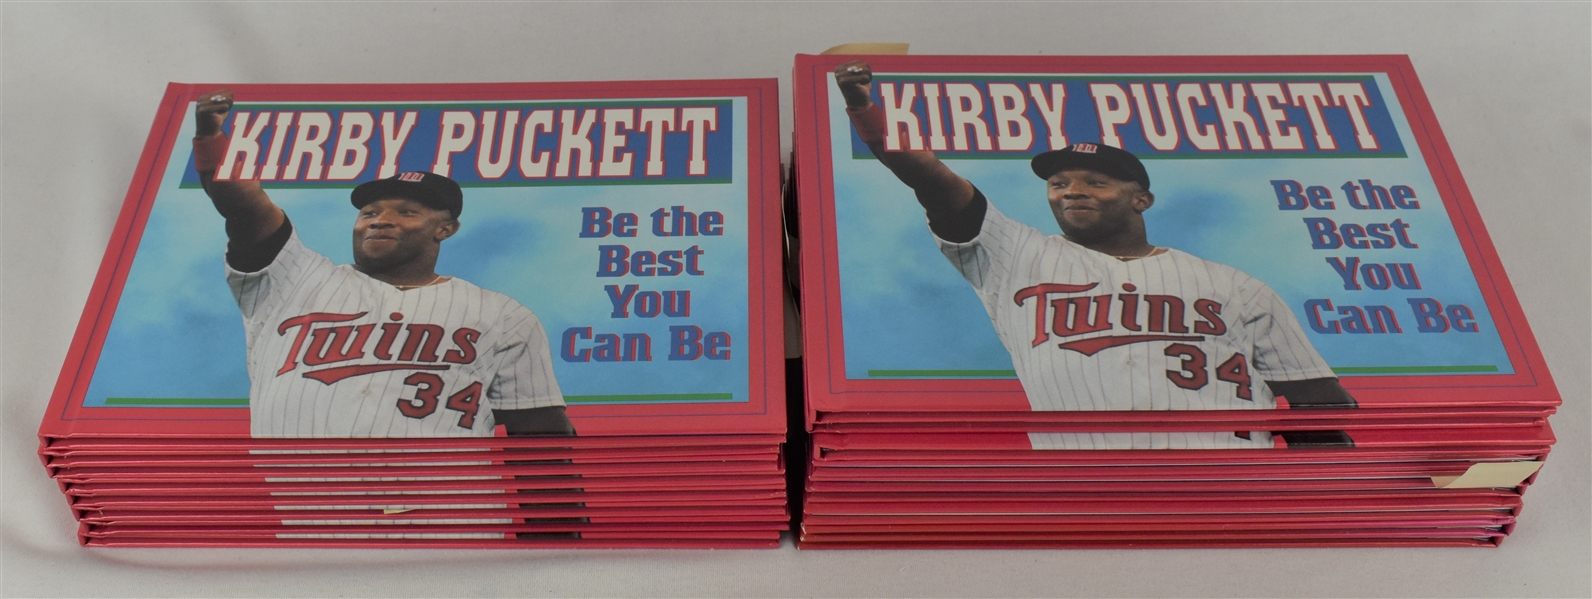 Kirby Puckett "Be The Best You Can Be" Hardcover Books w/Puckett Family Provenance 